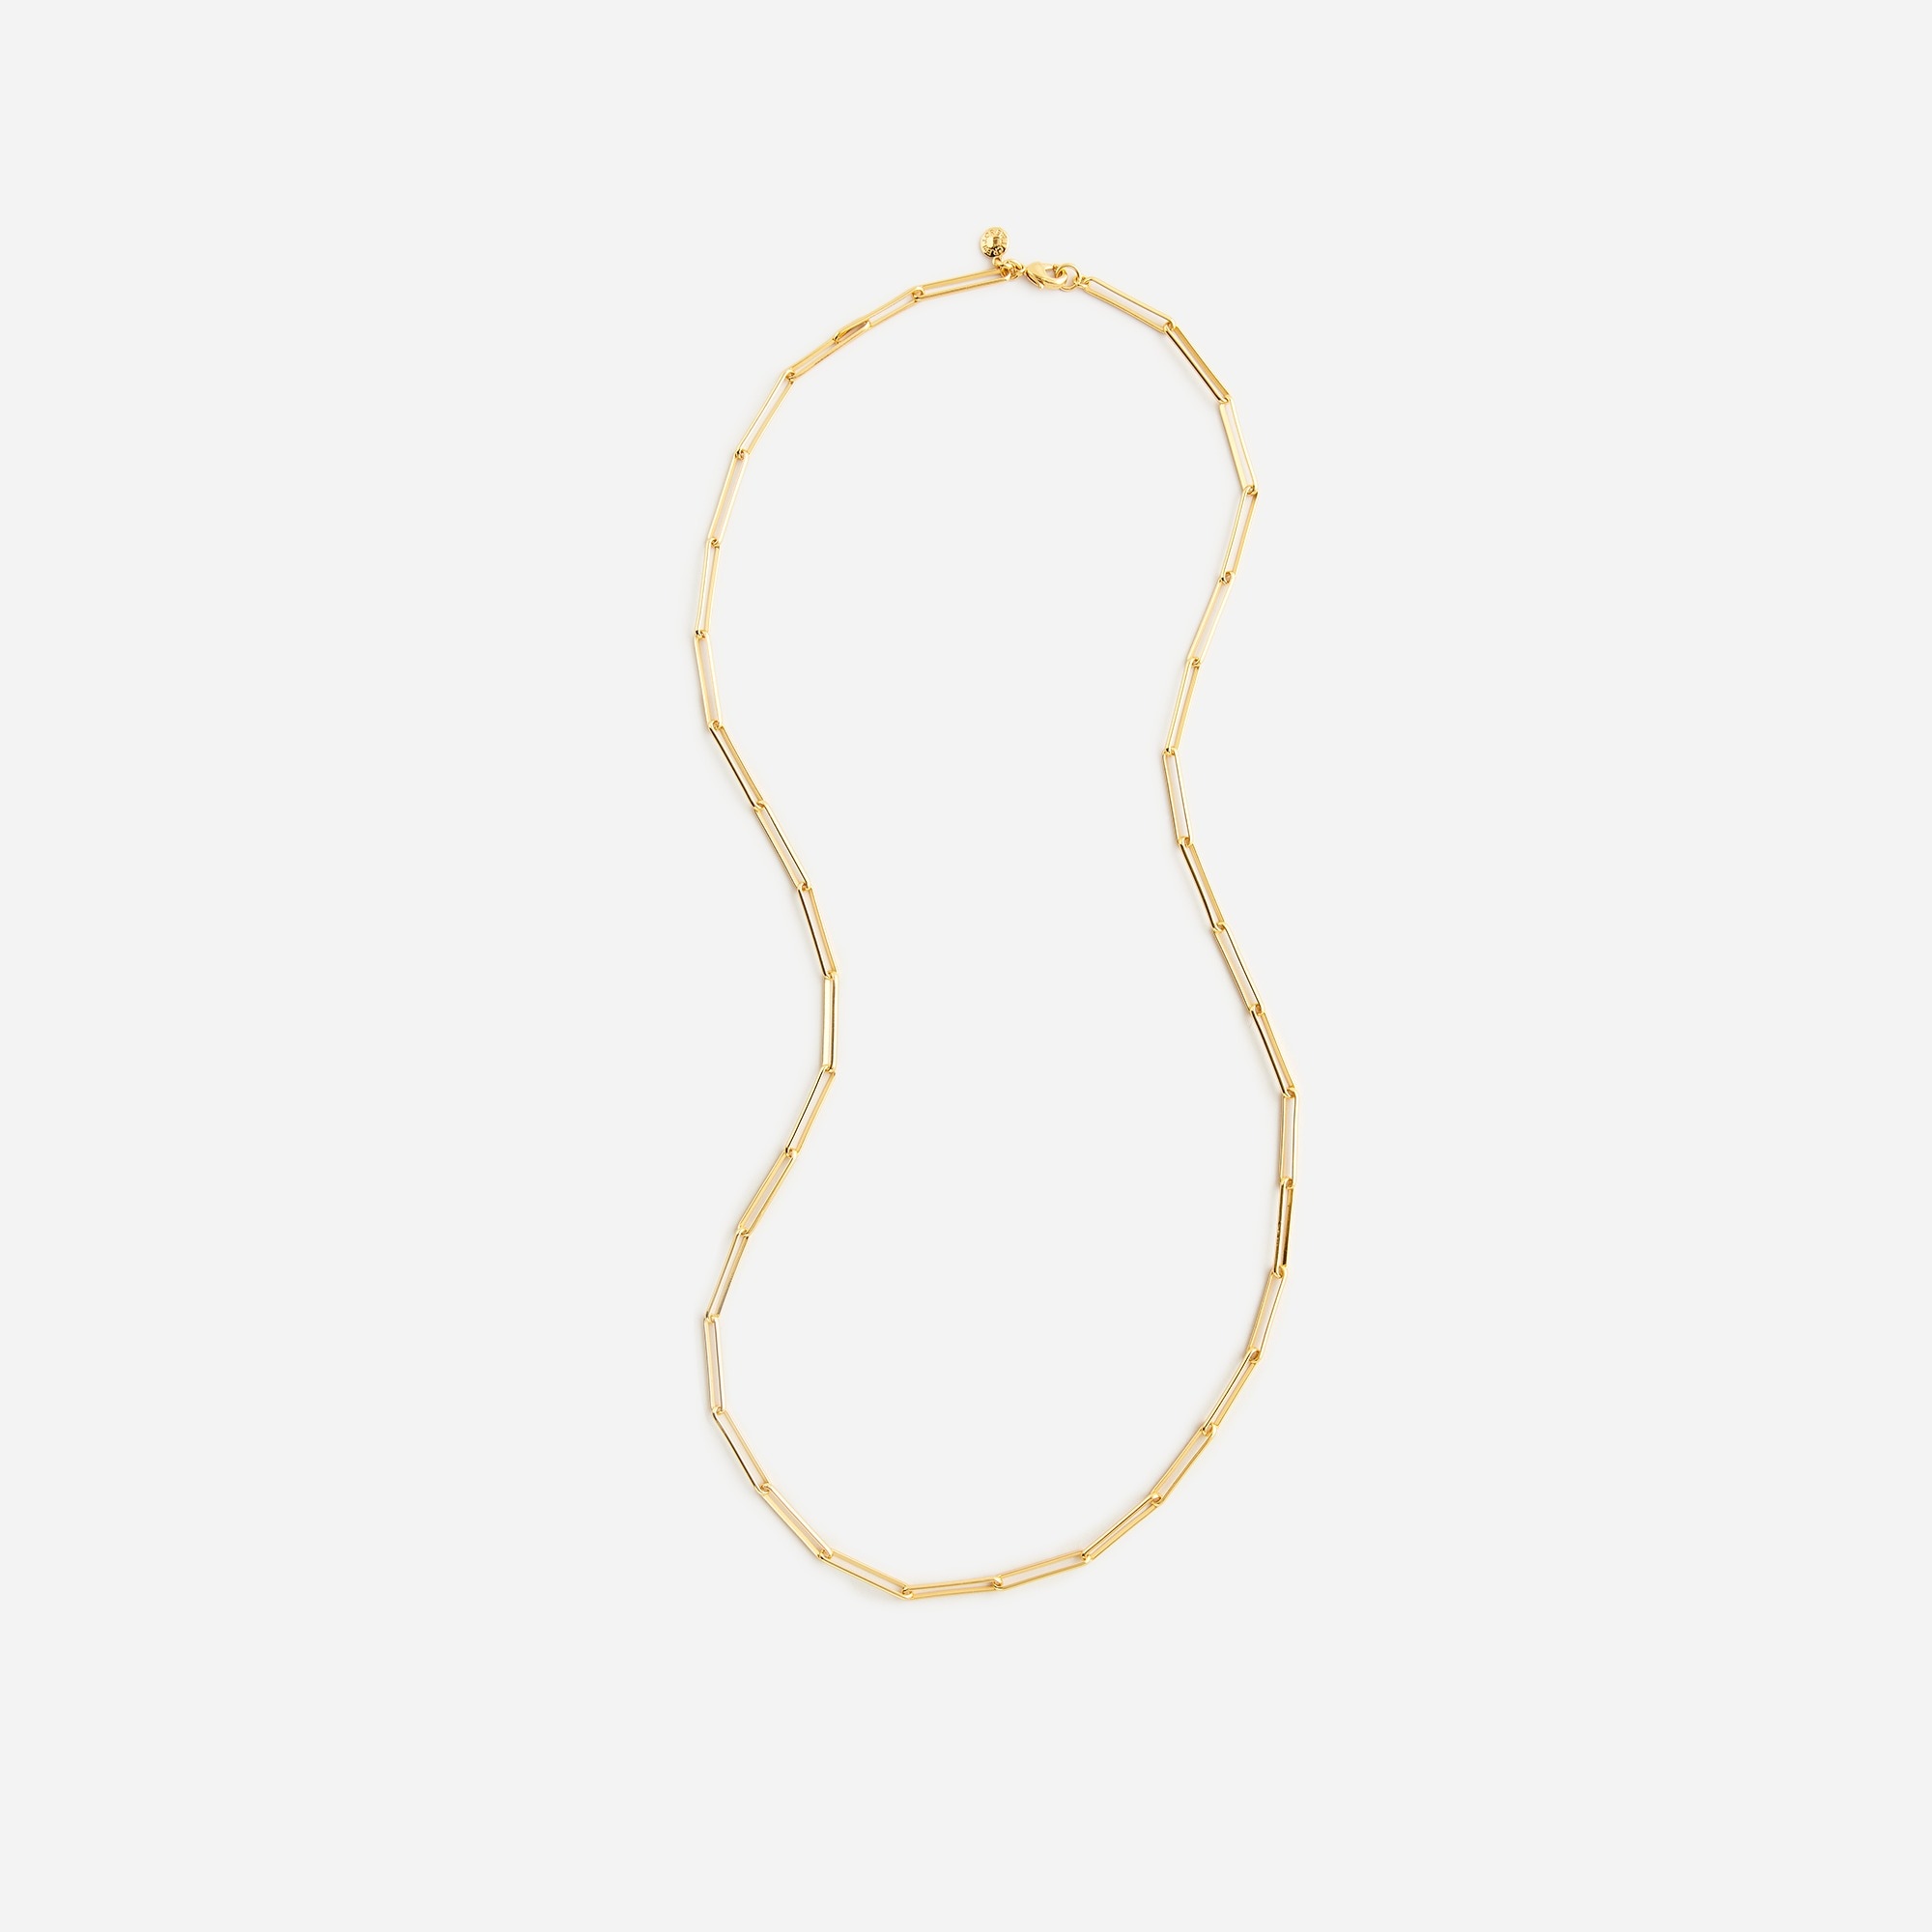  Dainty gold-plated paper-clip necklace